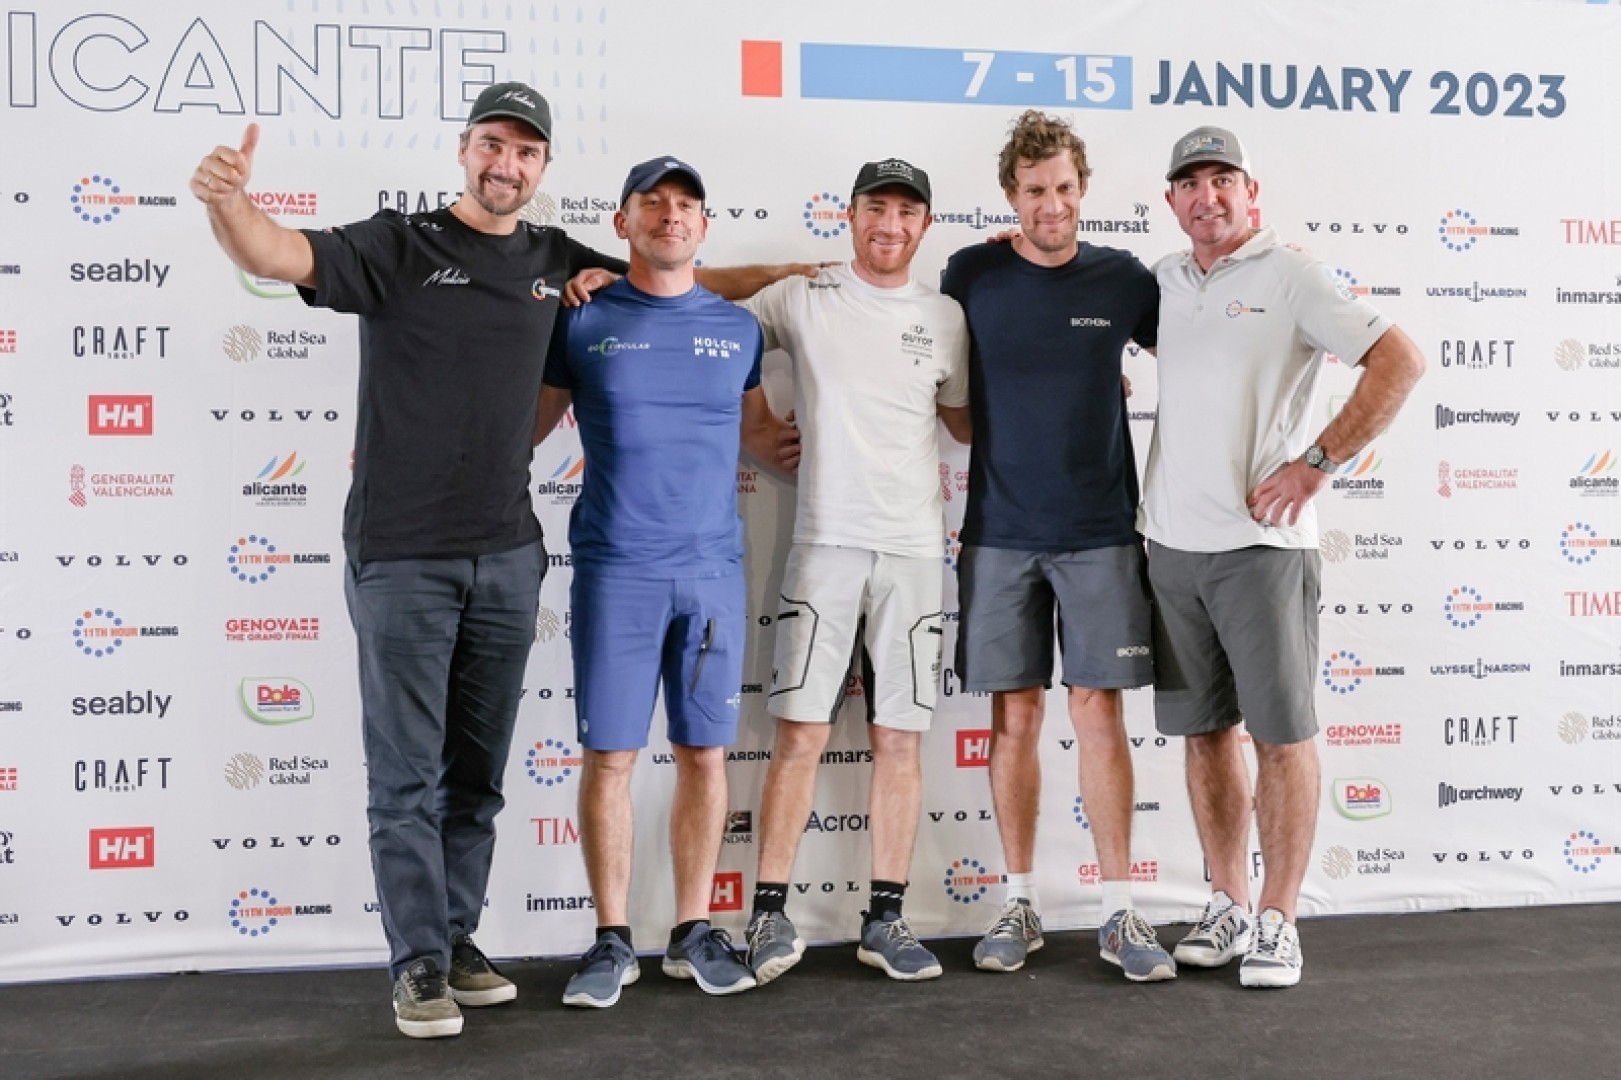 13 January 2023, IMOCA Skippers Press conference in Alicante: Boris Herrmann, Kevin Escoffier, Benjamin Dutreux, Paul Meilhat, Charlie Enright.